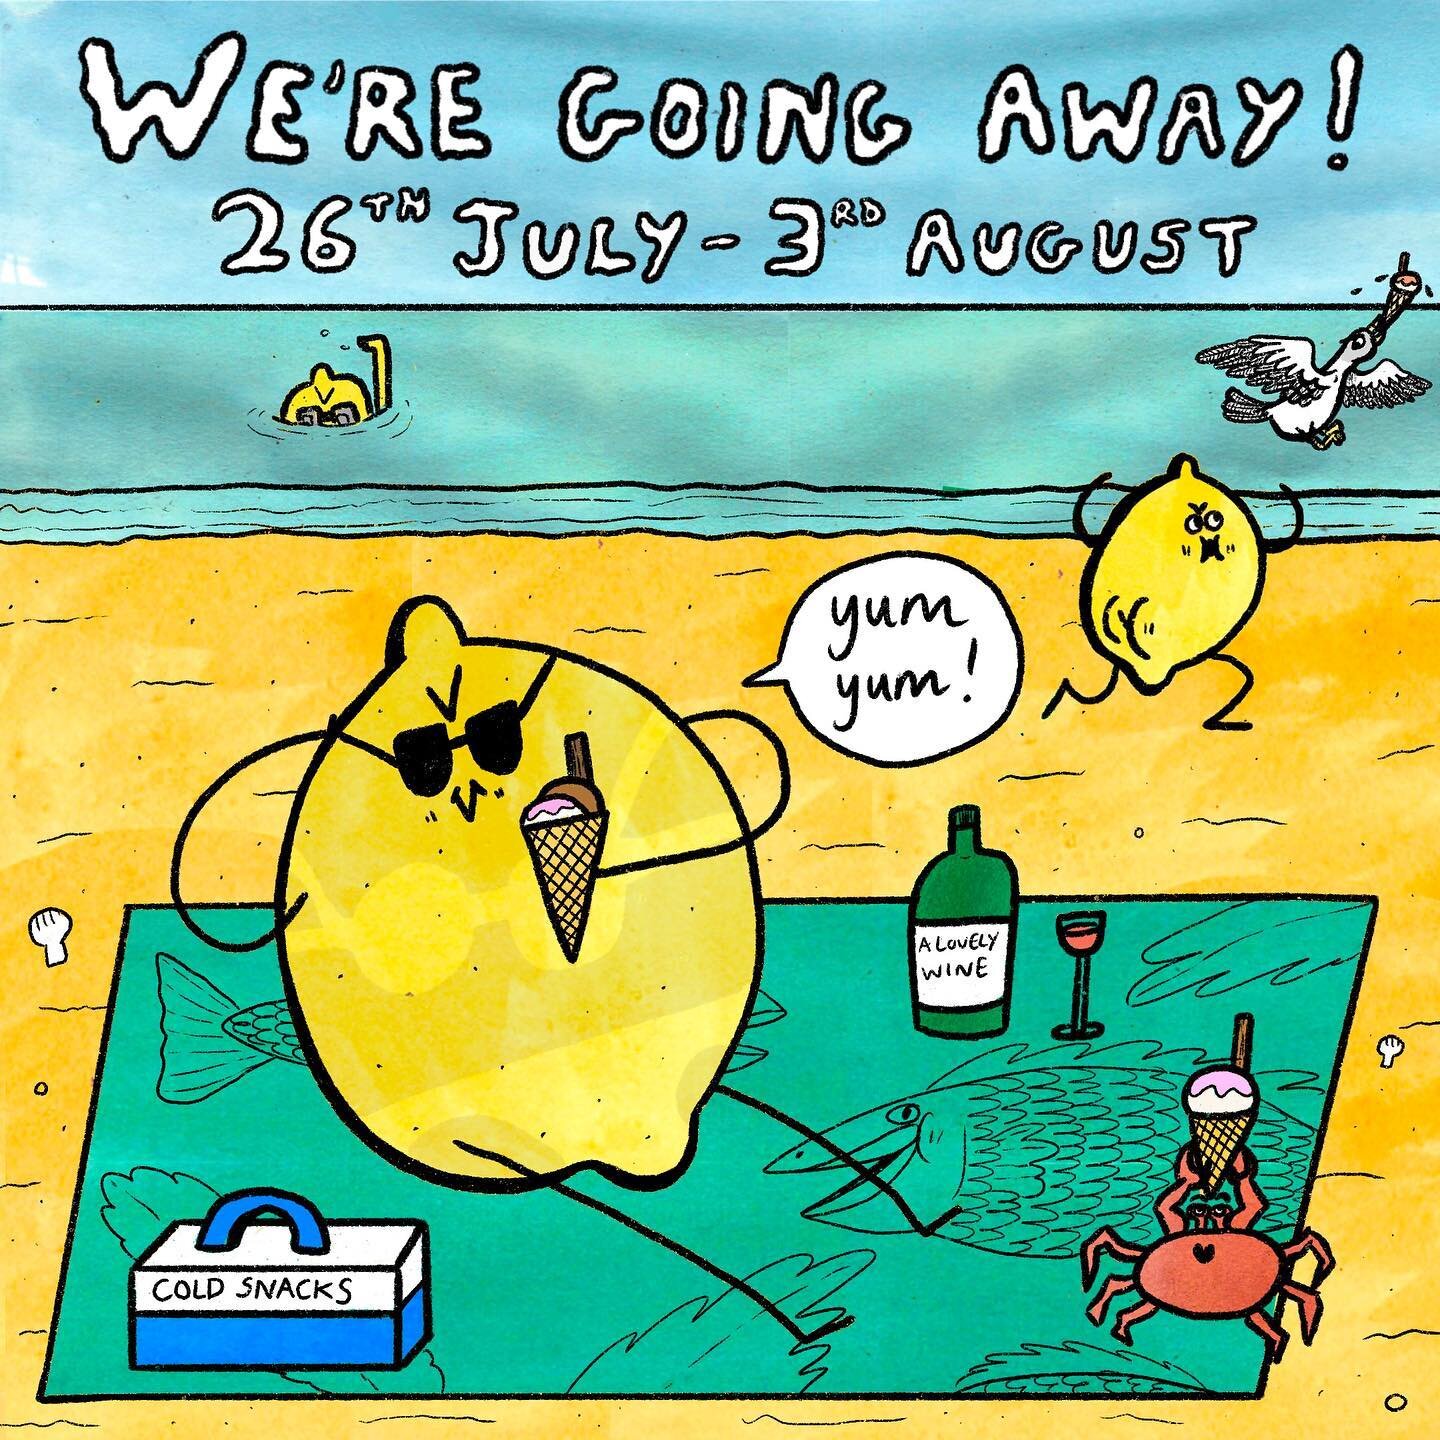 🍋2B HOLIDAY🍹
Hey everyone! This is just a lil announcement to say that from the 26th of July to 3rd of august we&rsquo;re going on a long-awaited holidayyy down south (with some work but lots of fun too!). We&rsquo;re only mentioning this as it mea